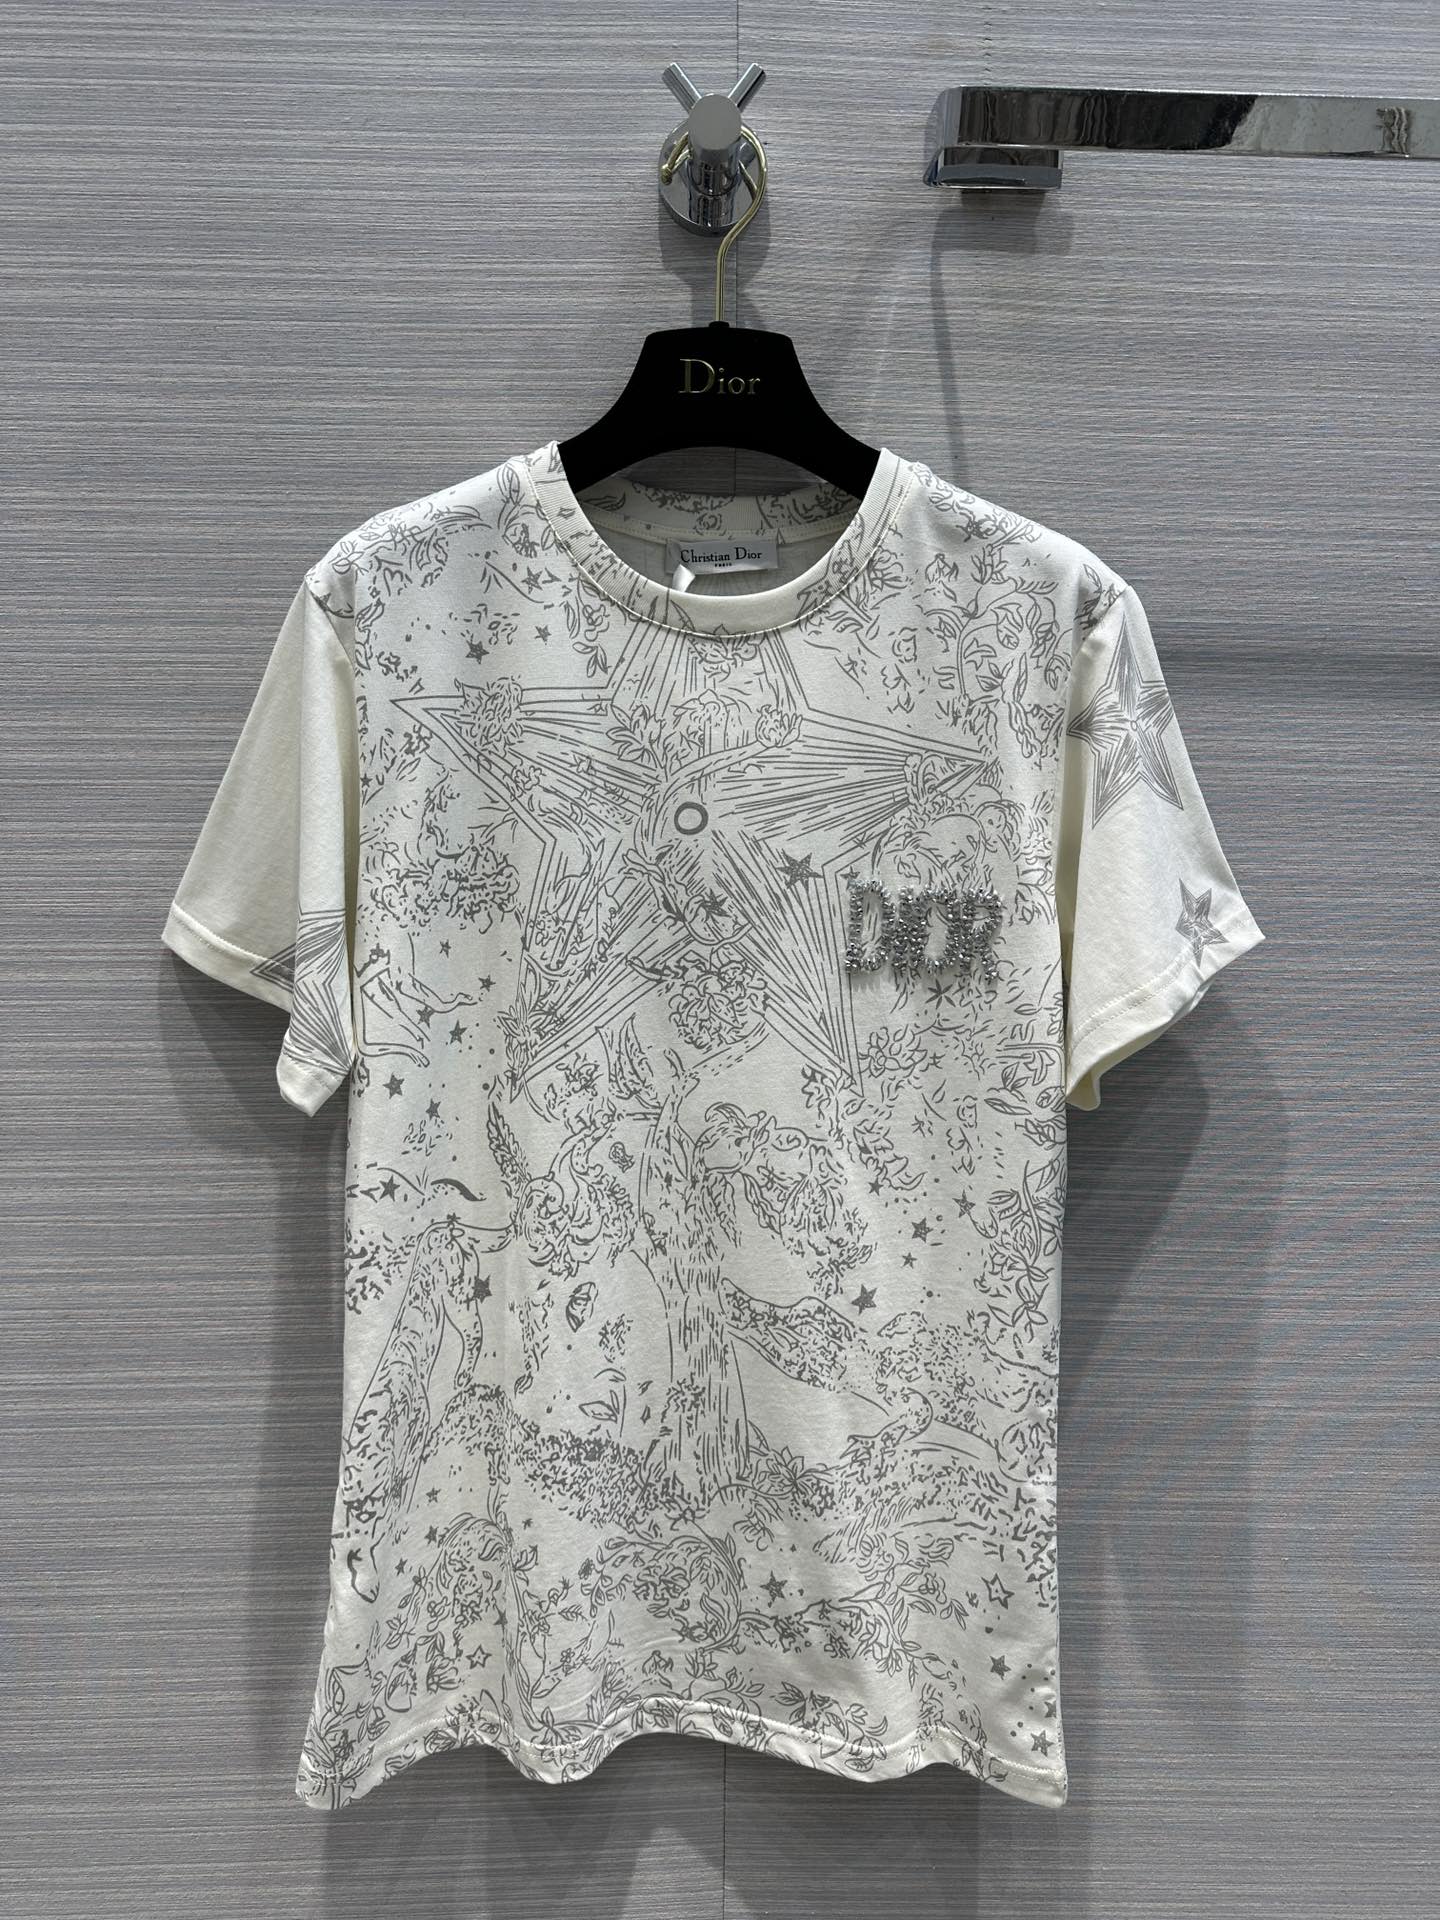 Dior Clothing T-Shirt White Printing Cotton Spring Collection